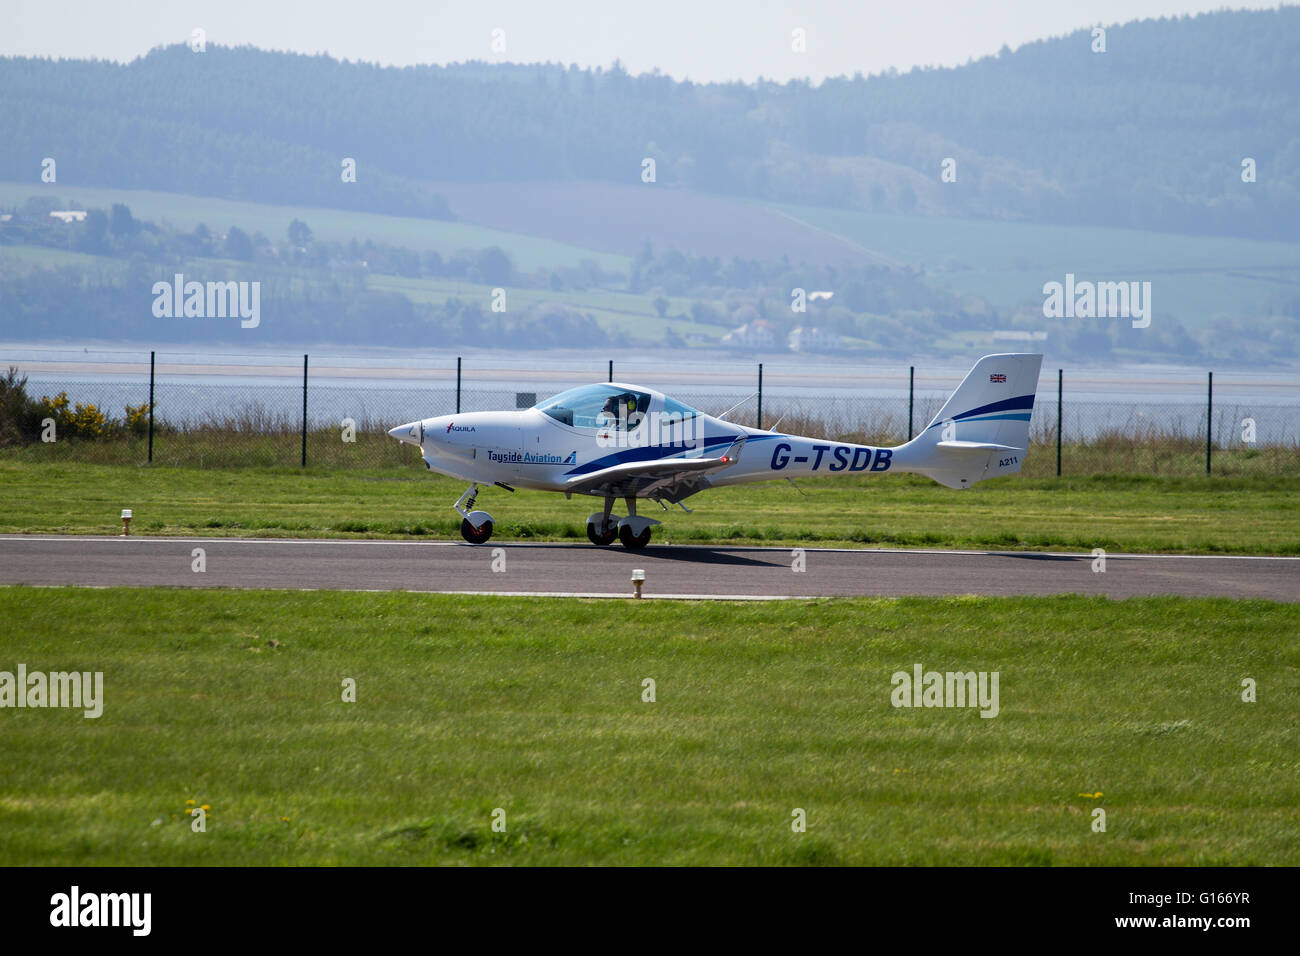 Dundee, Tayside, Scotland, UK, May 10th 2016. UK Weather: Warm sunny morning with a cool easterly breeze creating a thin haze across Dundee. Pilots from the Tayside Aviation landing their aircraft at the Dundee Airport. Credit: Dundee Photographics / Alamy Live News Stock Photo